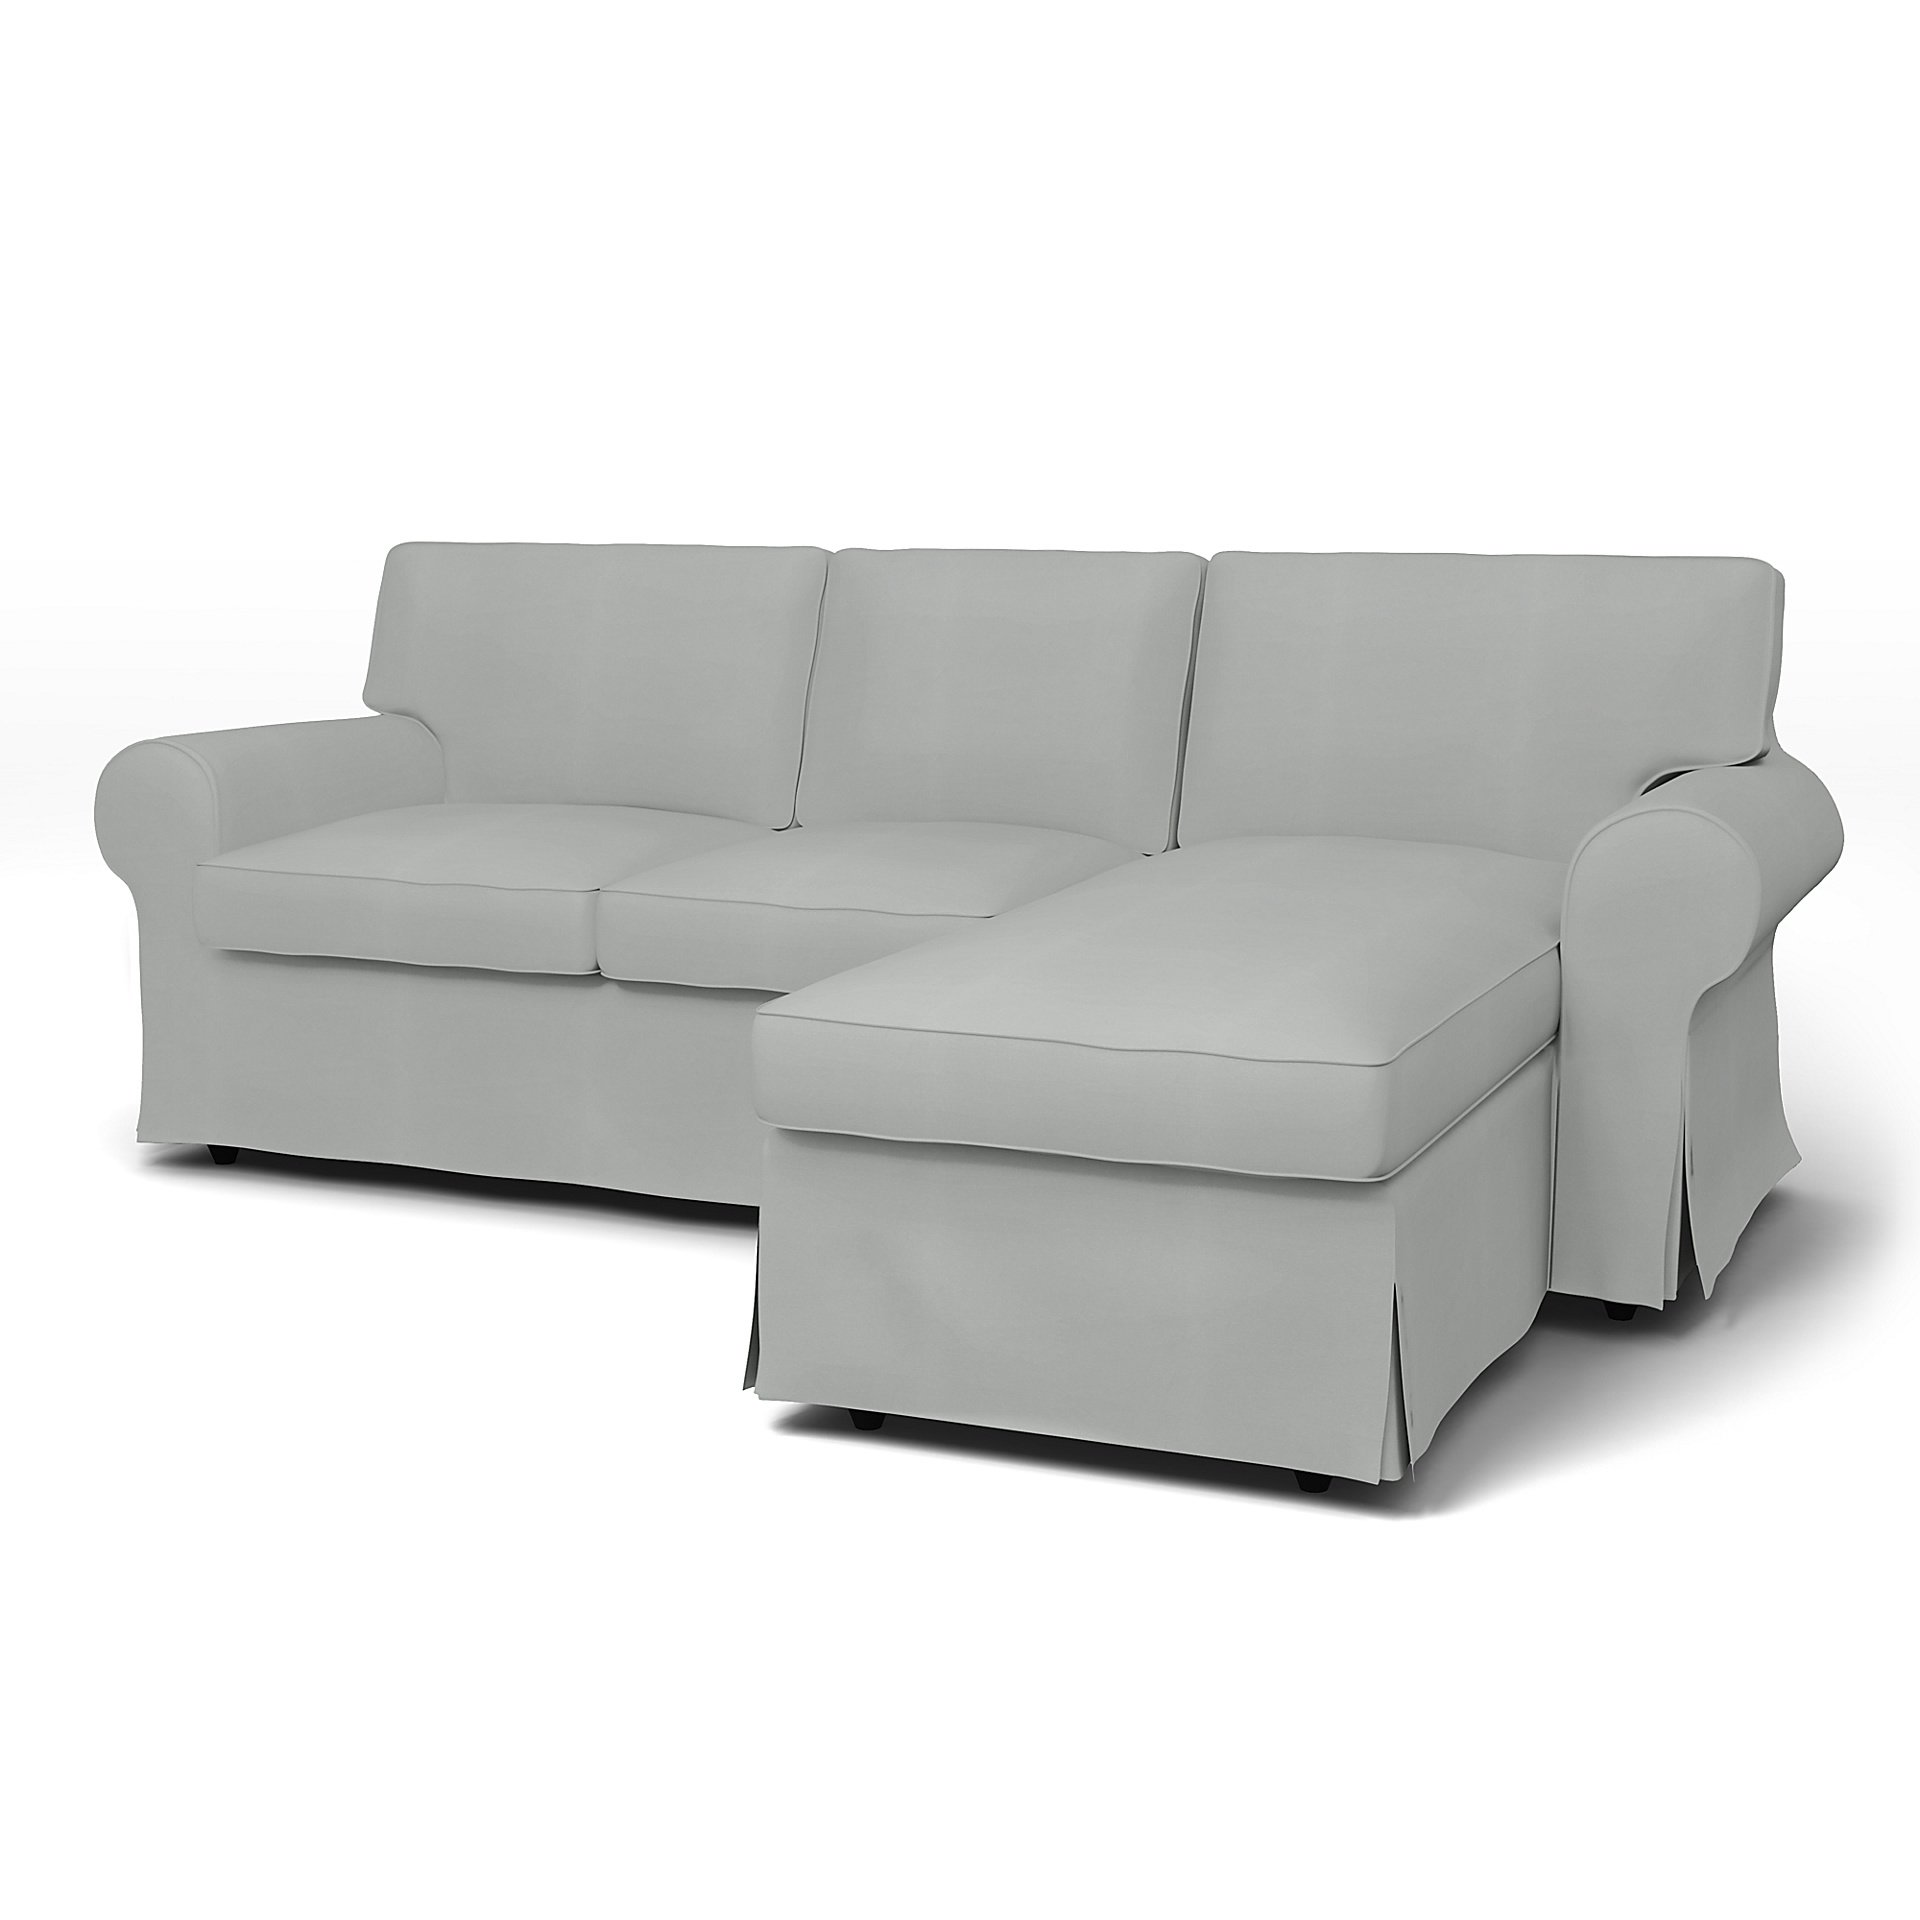 IKEA - Ektorp 3 Seater Sofa with Chaise Cover, Silver Grey, Cotton - Bemz